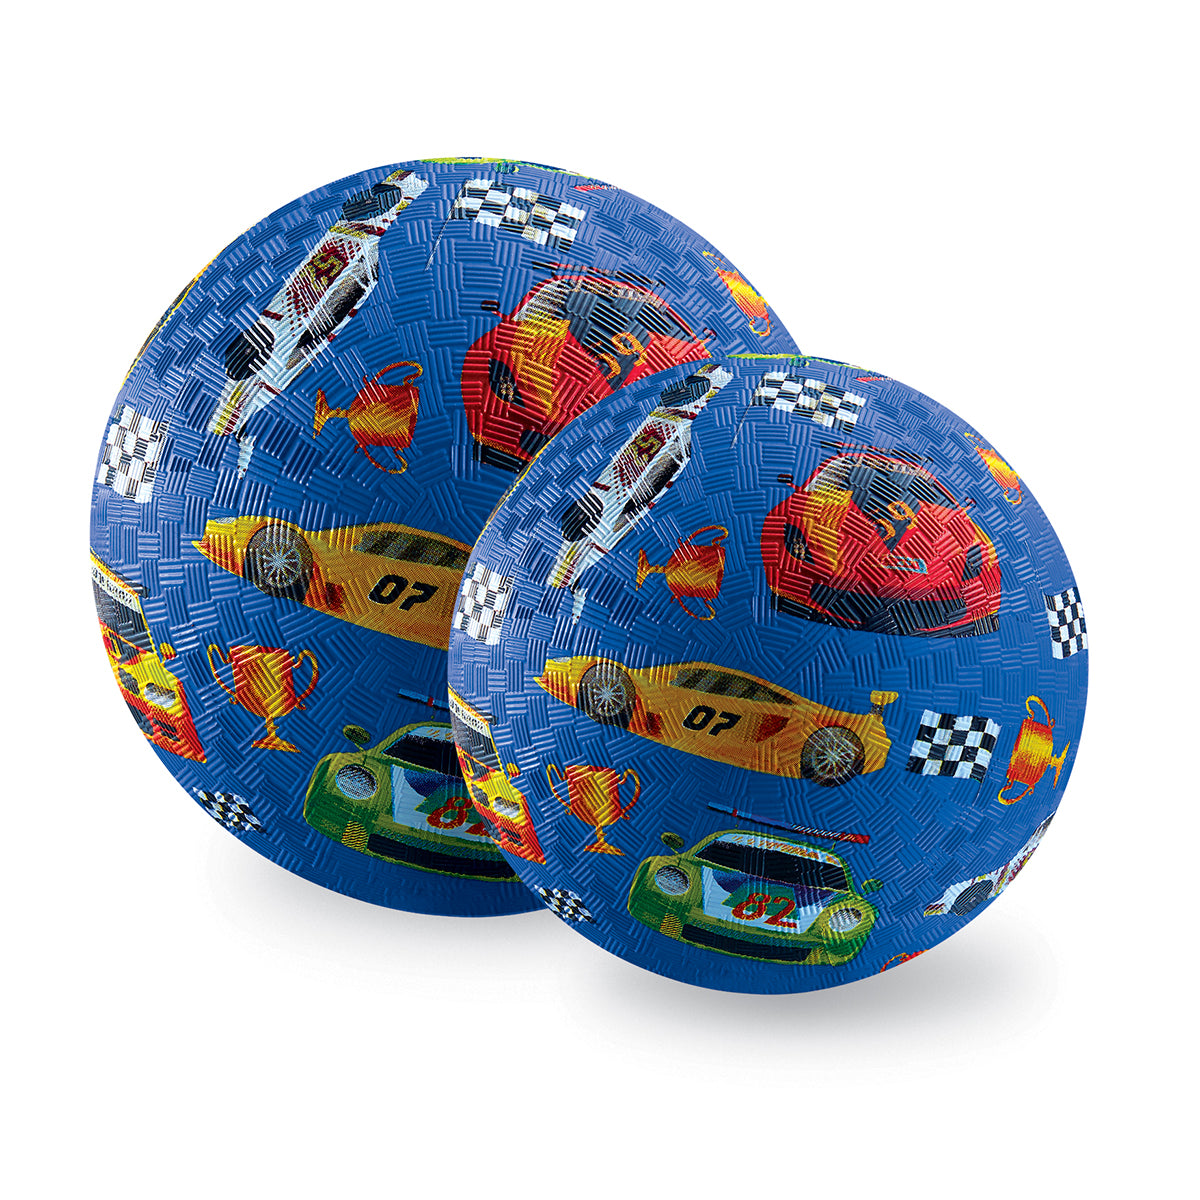 5" Playground Ball - At the Races